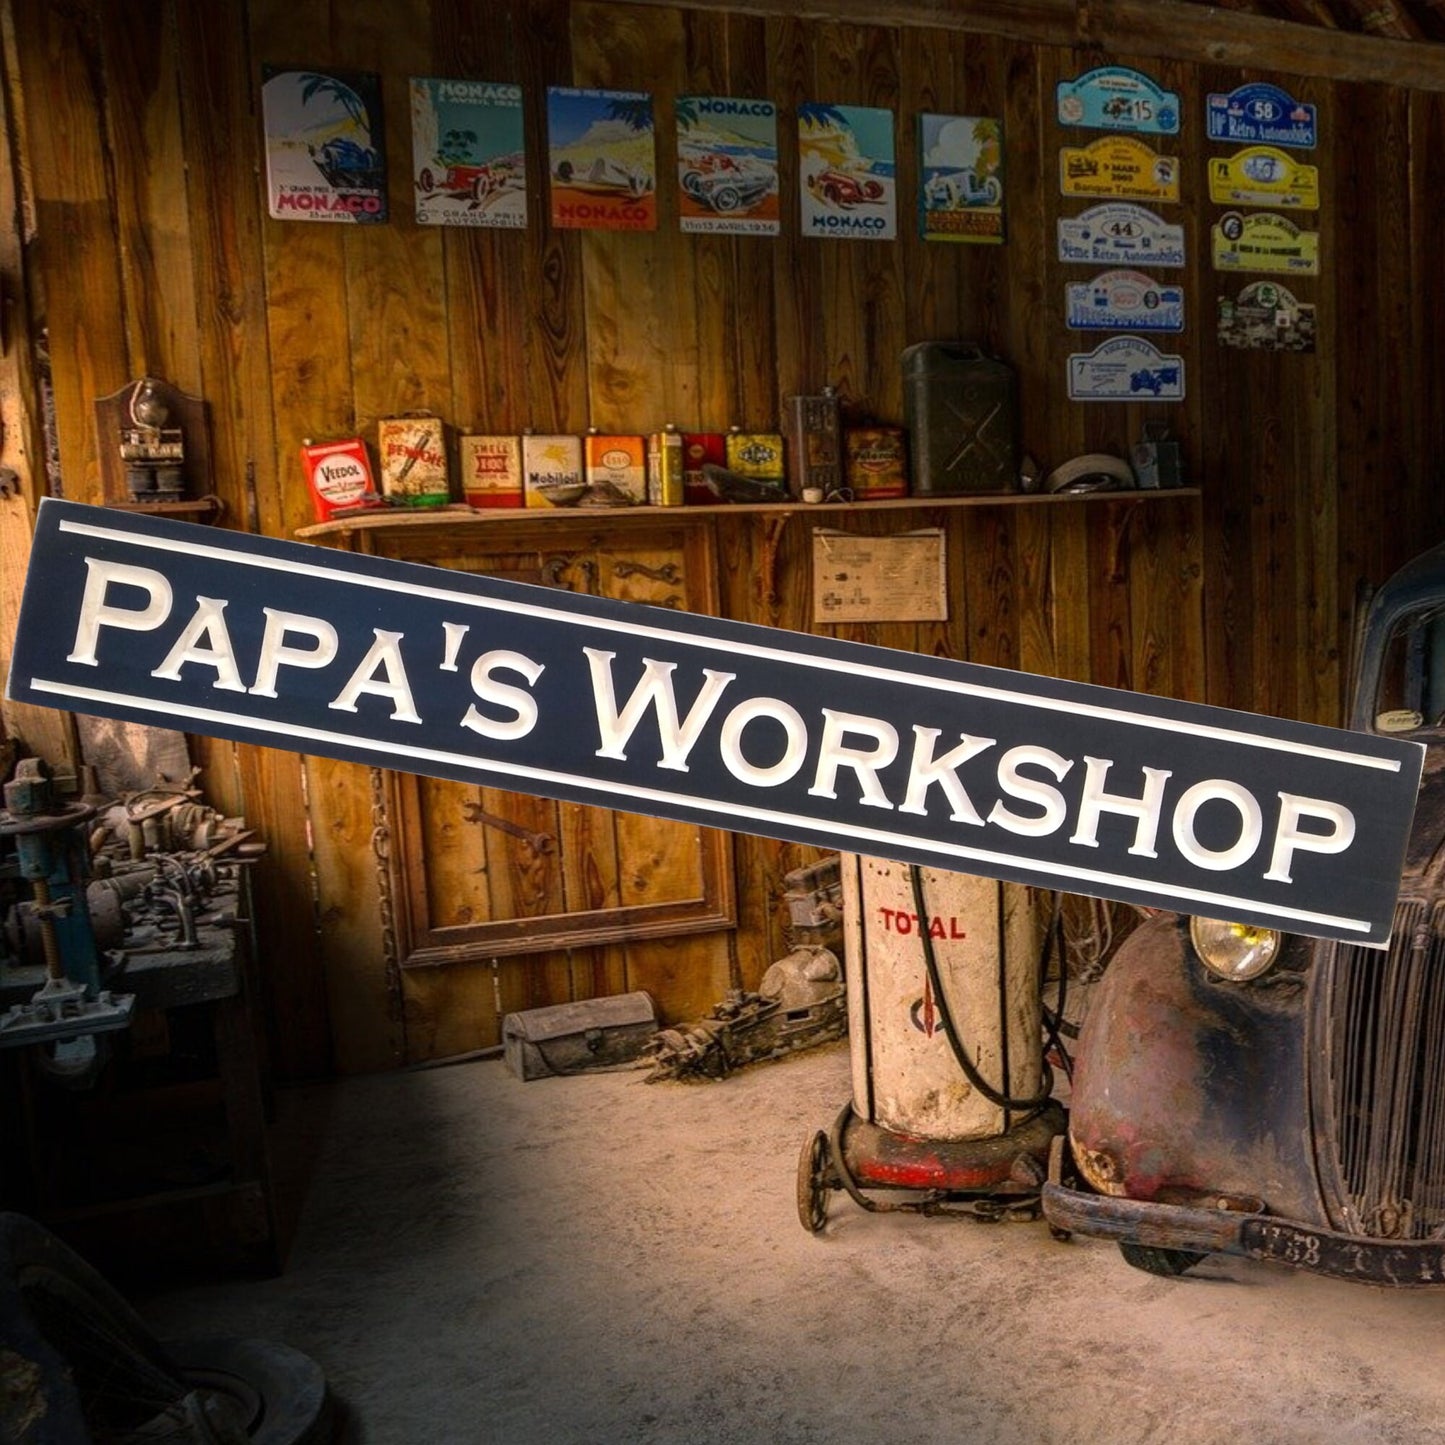 Papa's workshop, personalized Wooden Sign,gift for Papa,Father's day gift